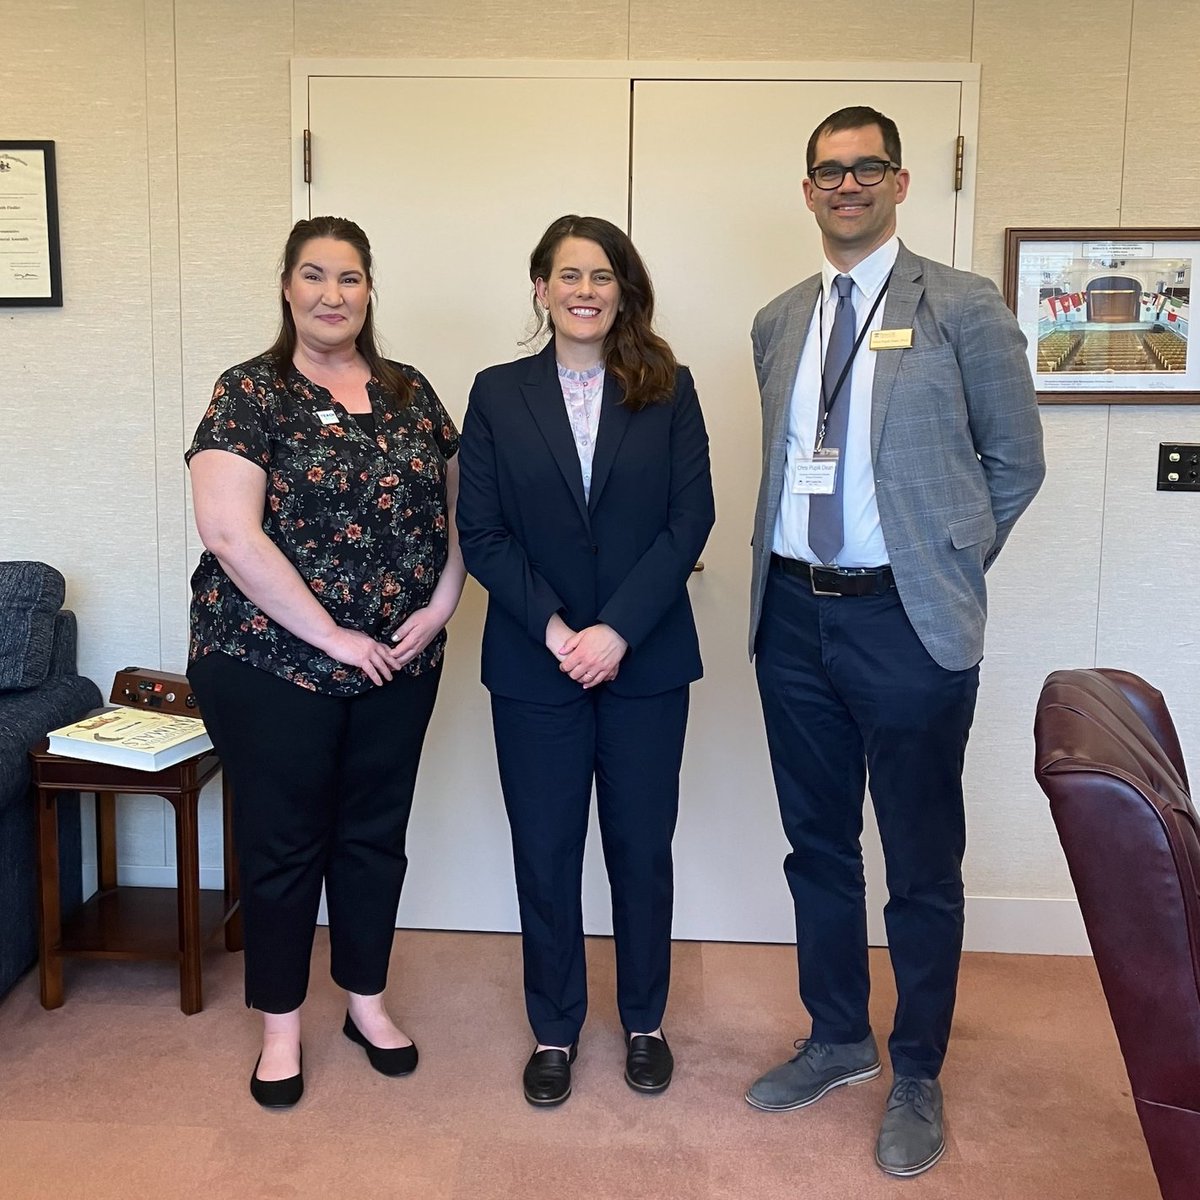 Yesterday I talked about literacy & the value of student-teacher stipends with Kristyn Kahalehoe, a teacher in my district at D. Newlin Fell Elementary School, and Chris Dean, a member of the PA Educator Diversity Consortium. Always glad to learn how I can support our schools! 📚